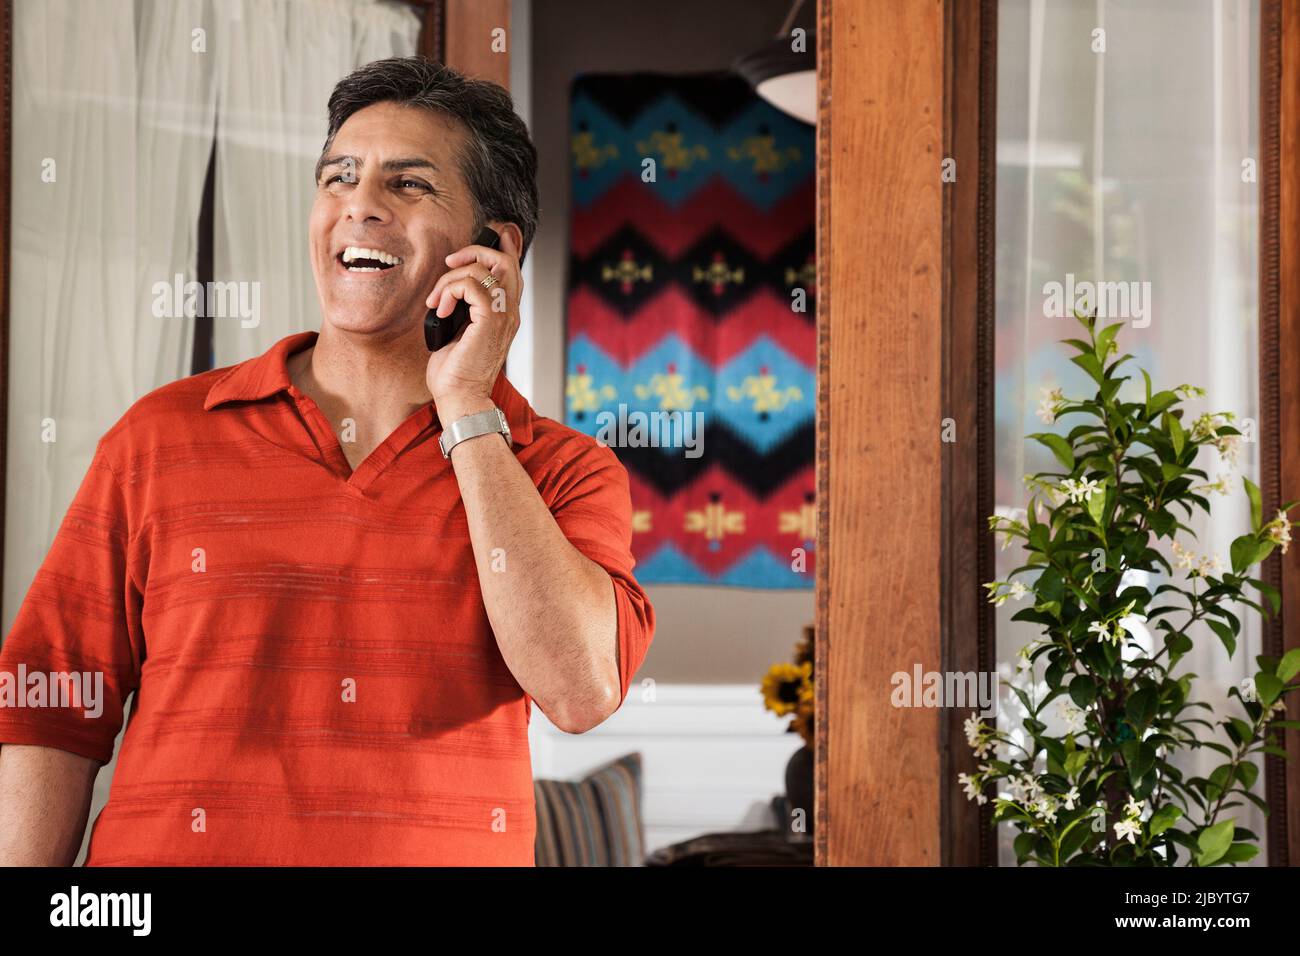 Hispanic man talking on cell phone Banque D'Images